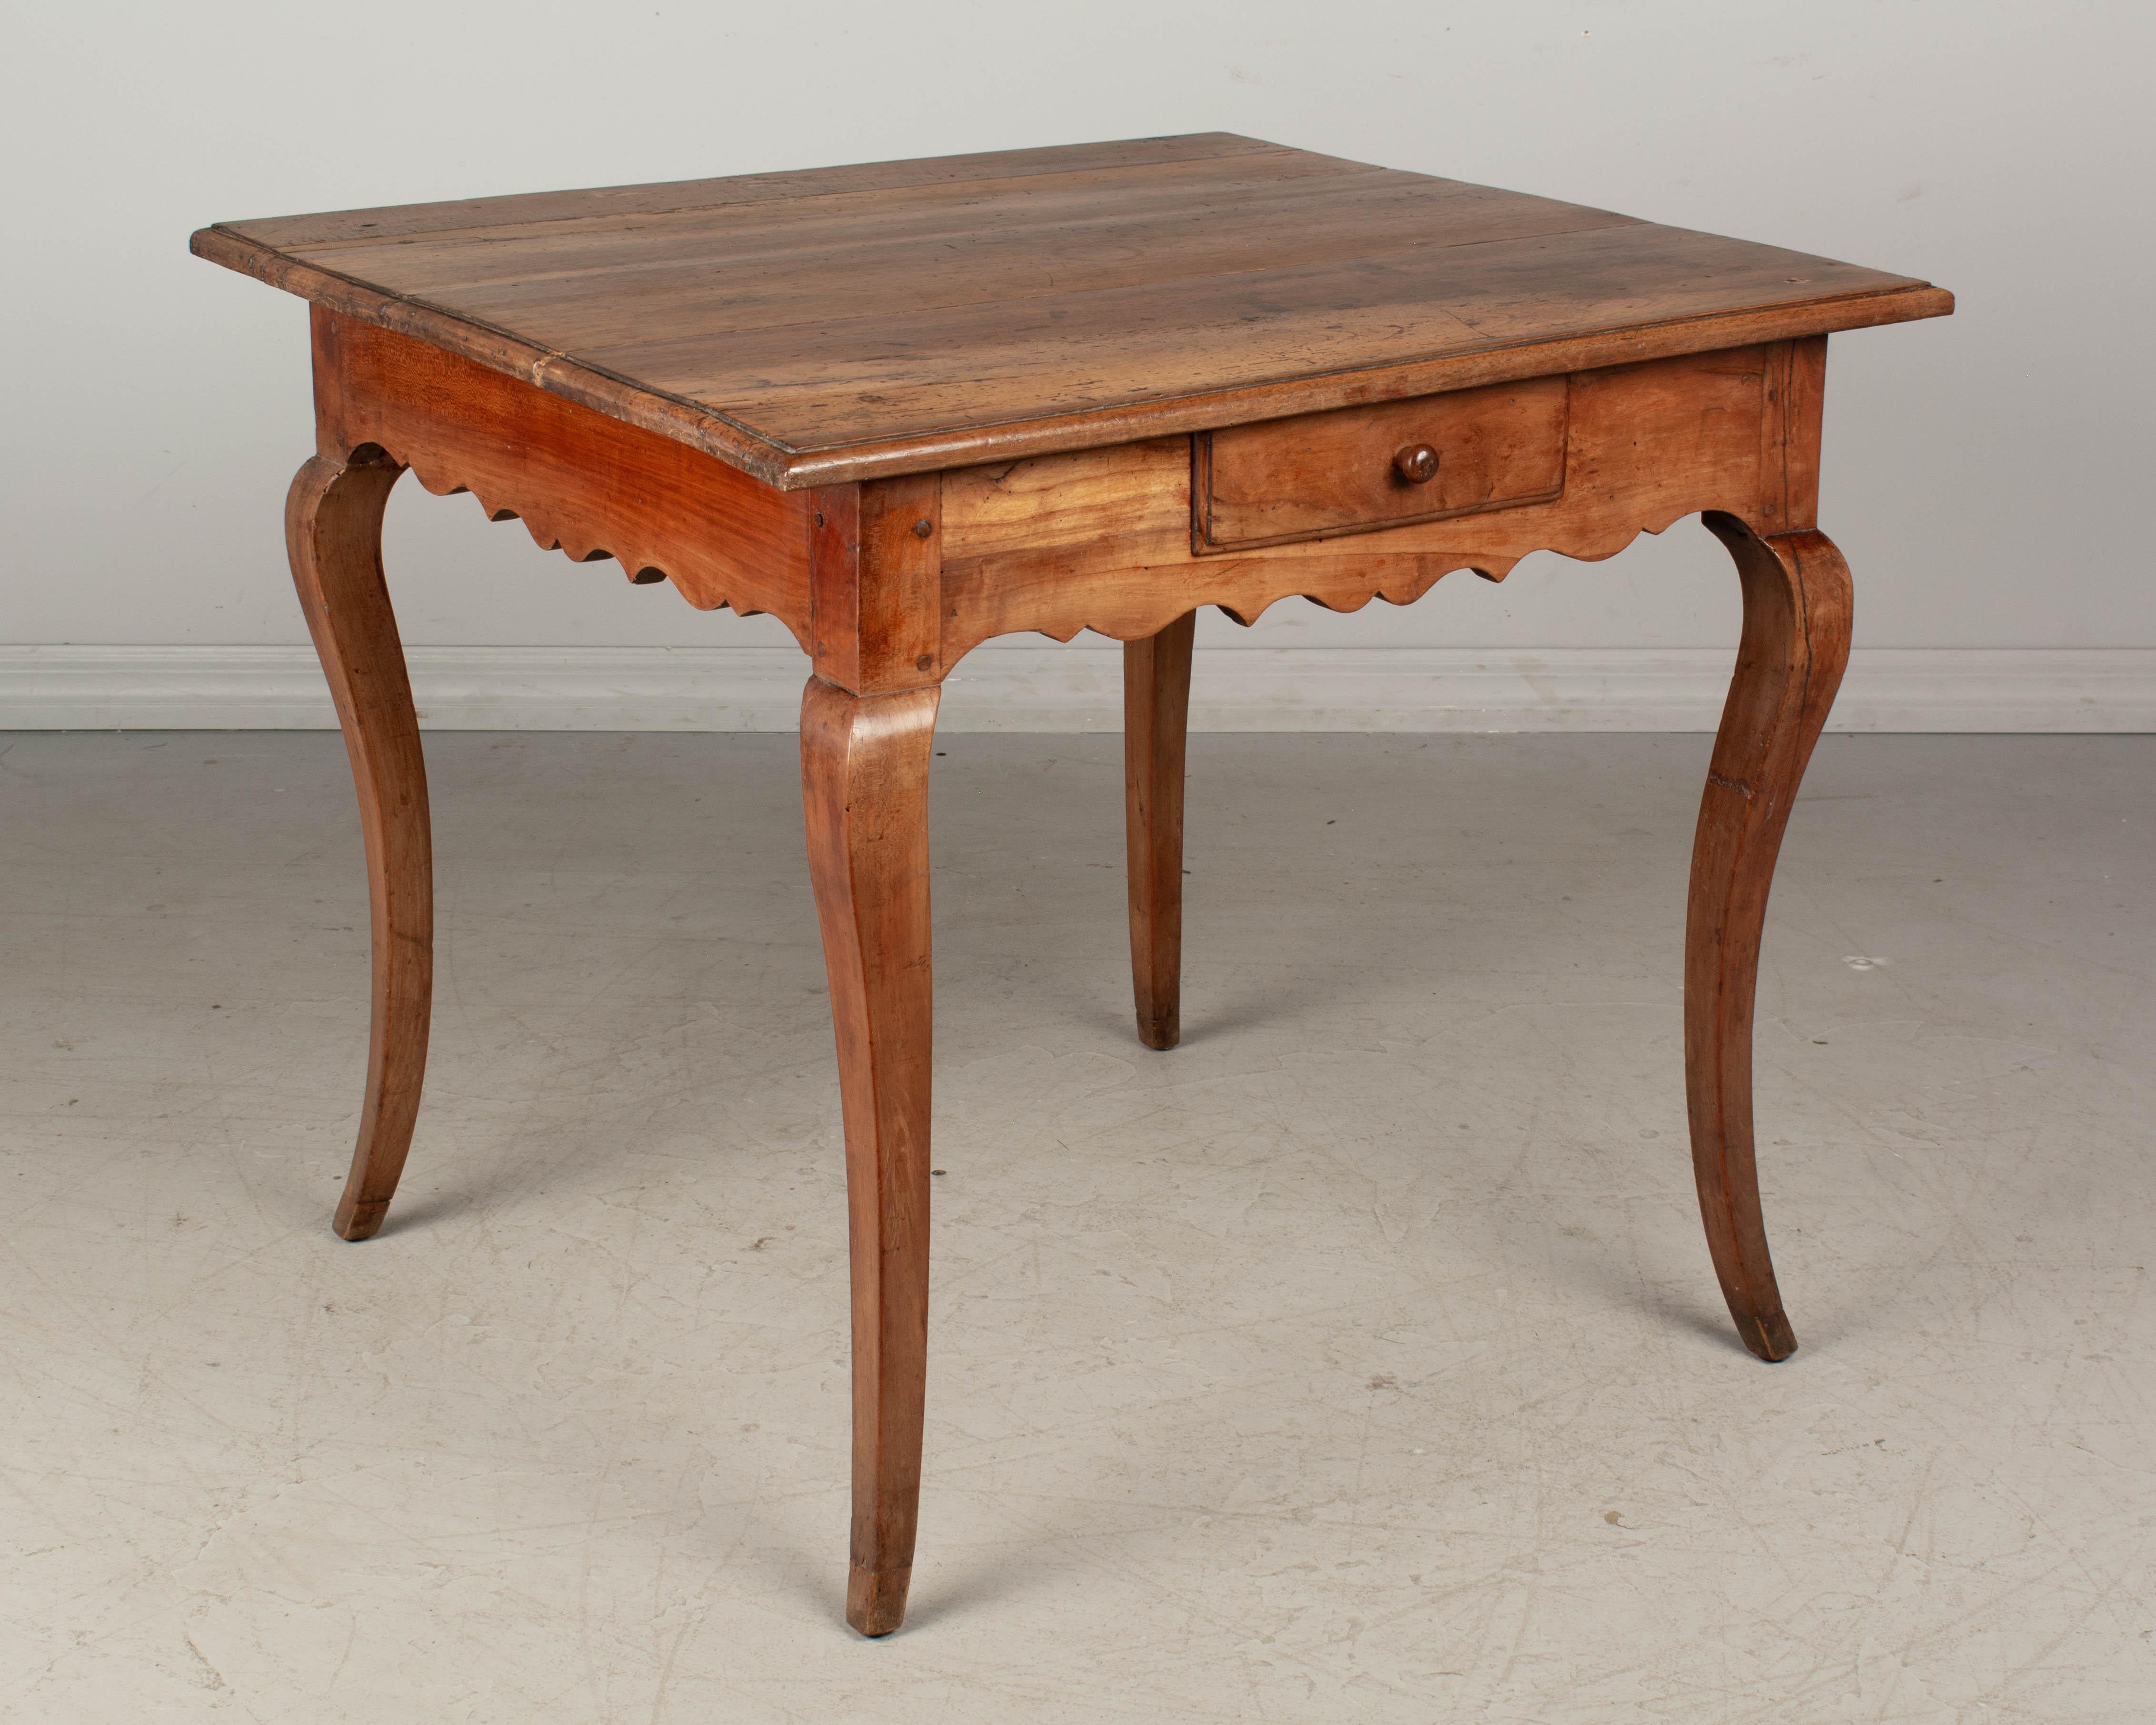 An early 19th century Louis XV style Country French side table with a cherry wood base and a walnut top. Two dovetailed drawers, scalloped apron and curved legs. Repairs on legs. Waxed Patina.
Please refer to photos for more details. Pictures are